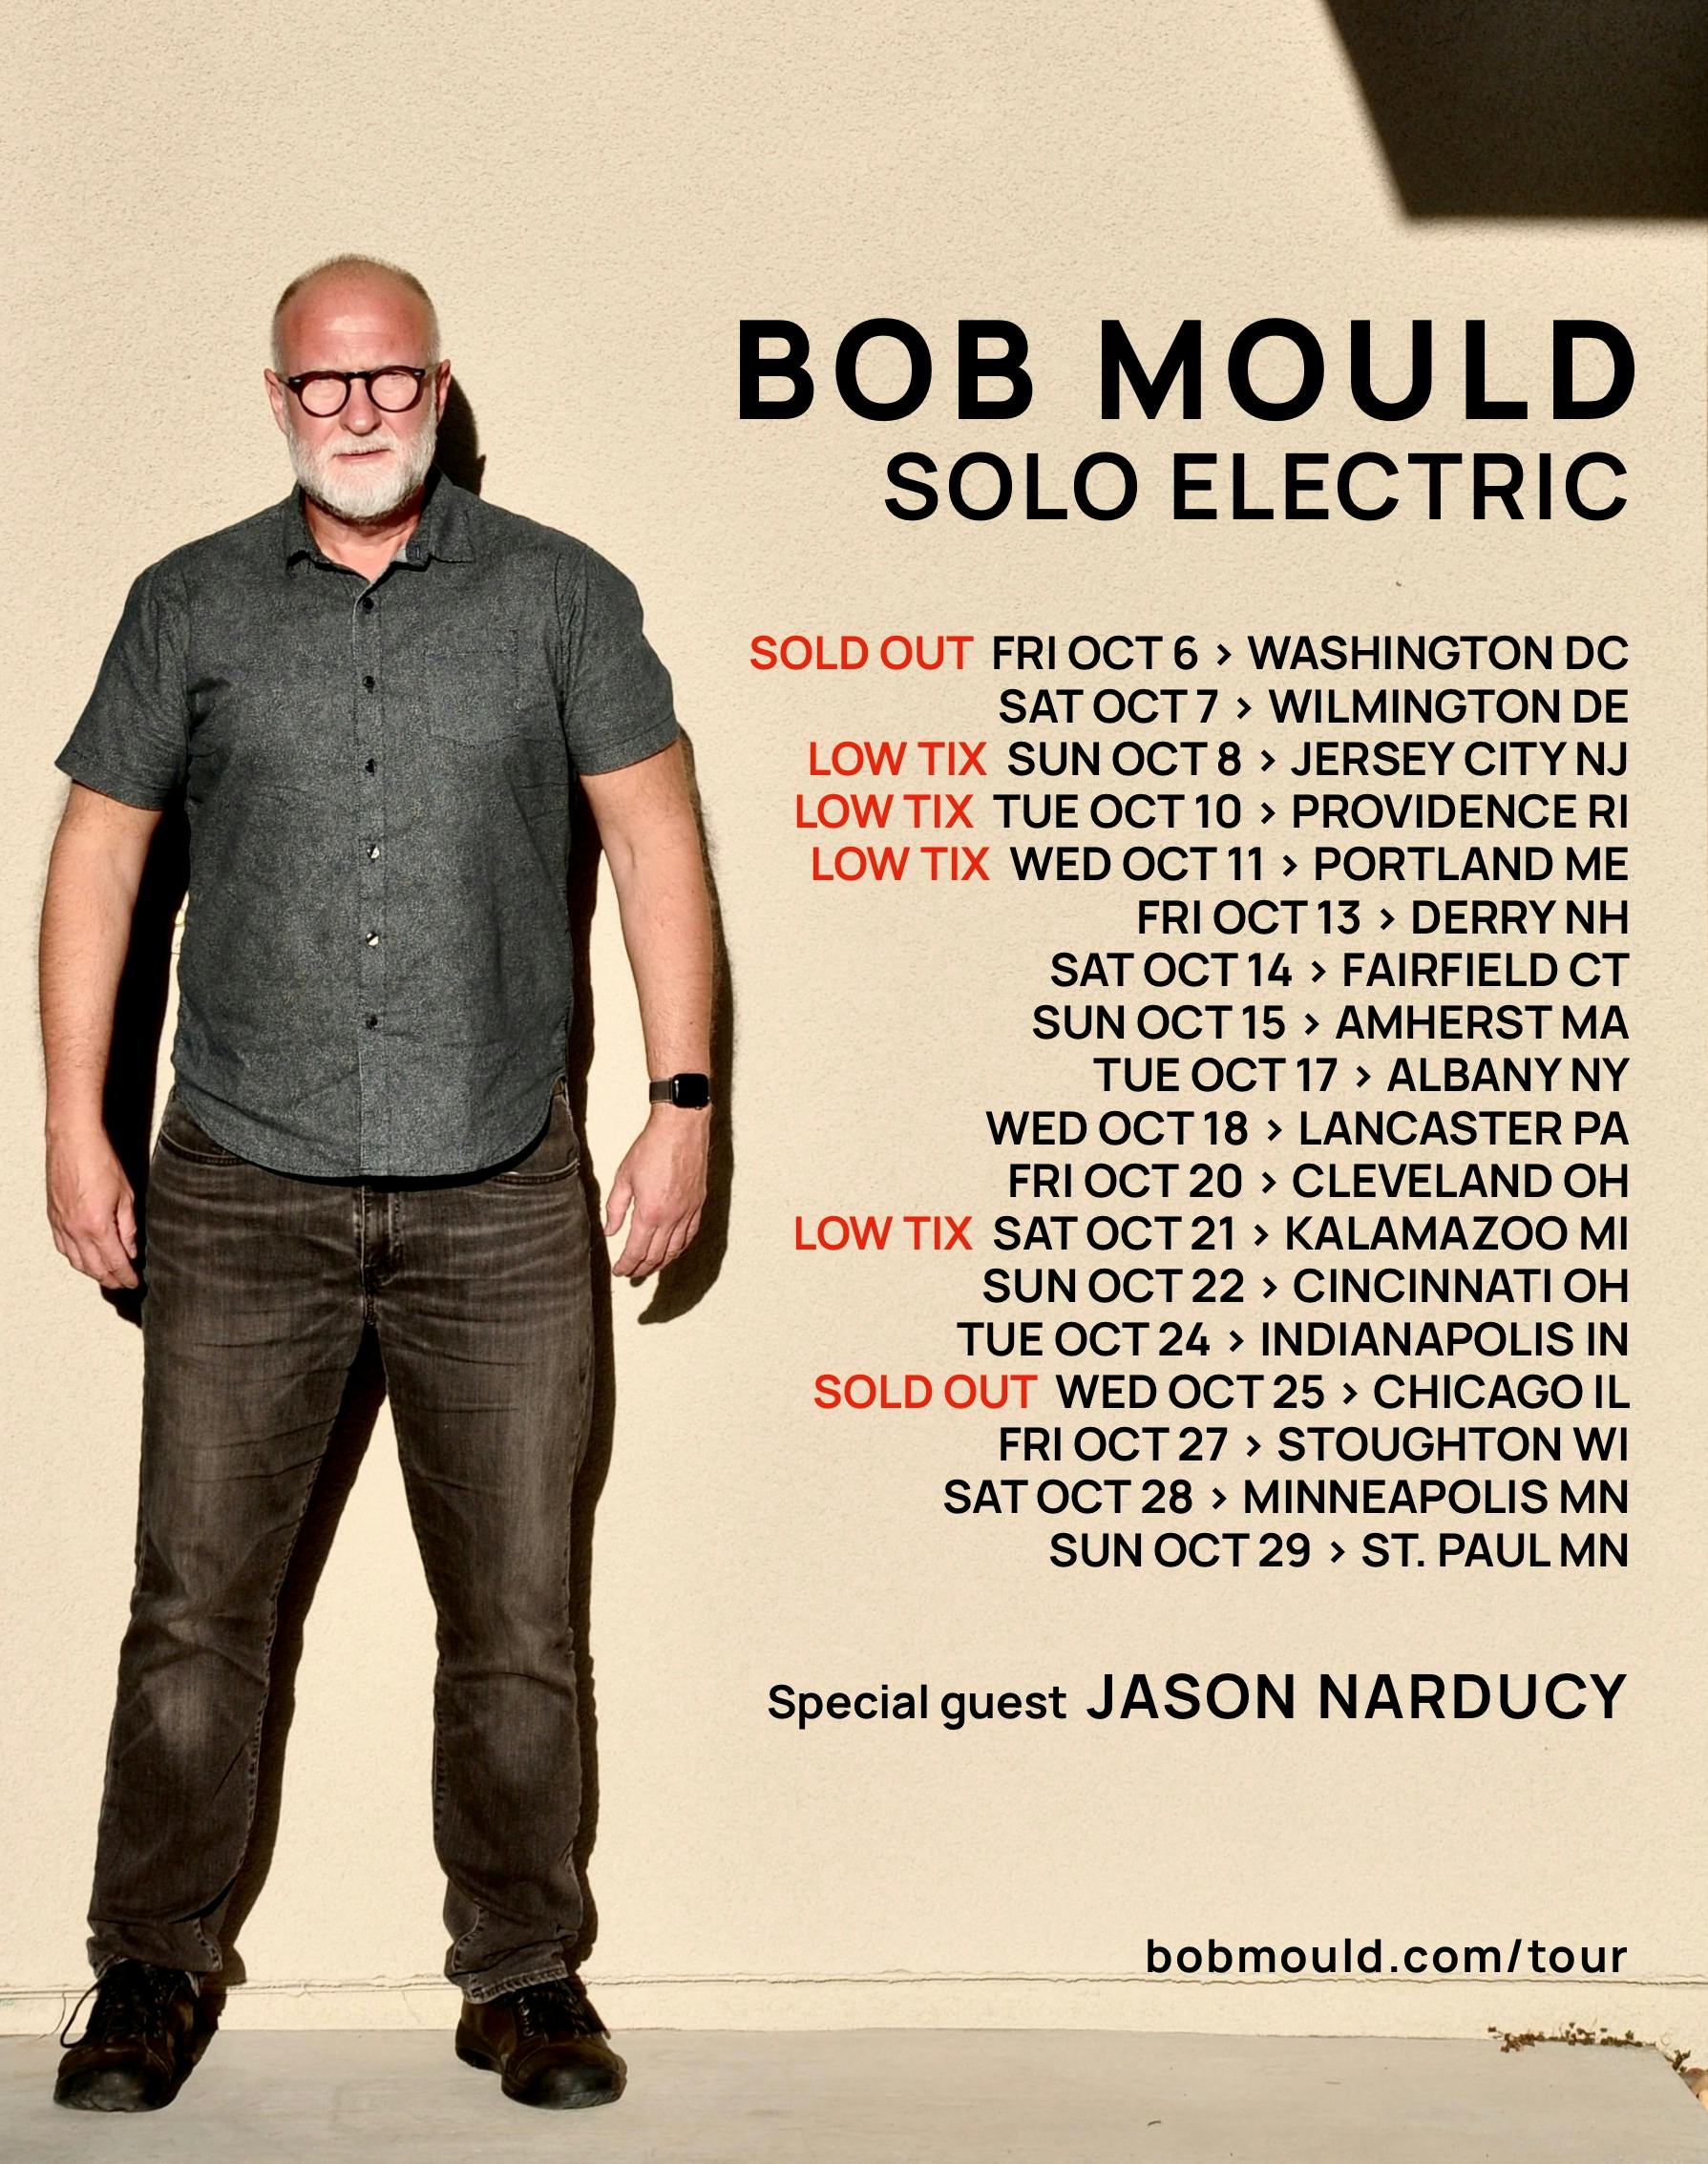 Today, Bob Mould announces an extension of his fall Solo Electric tour of the United States starting on October 6 at the Atlantis in Washington, DC. Two new dates have been added.